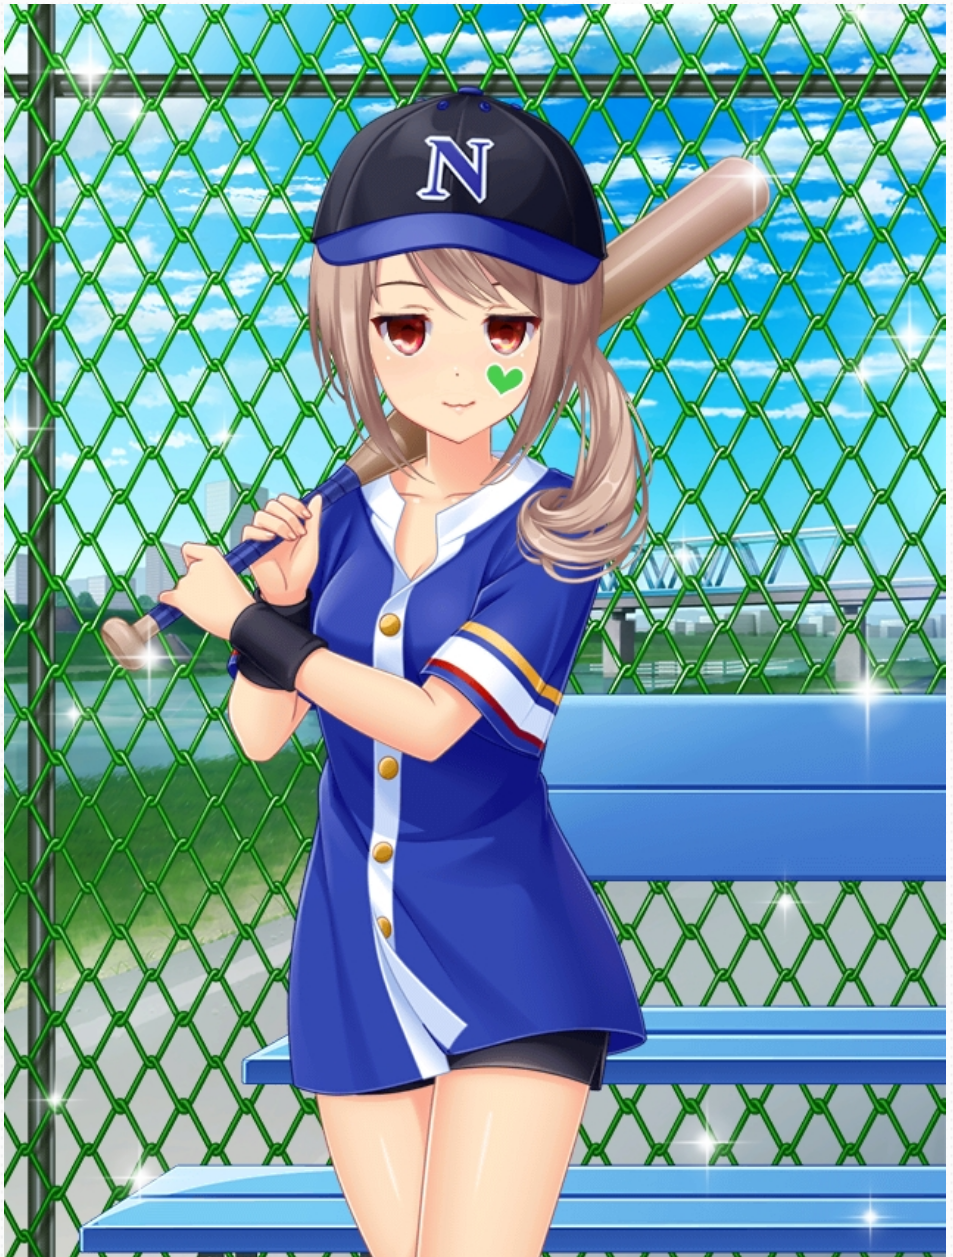 Tamayomi: The Baseball Girls the Complete Season | Available Now! | Ready  to see Yomi's “Magic Throw”? ⚾ Tamayomi: The Baseball Girls the Complete  Season is available now! ✨ https://weareani.me/bss34d | By